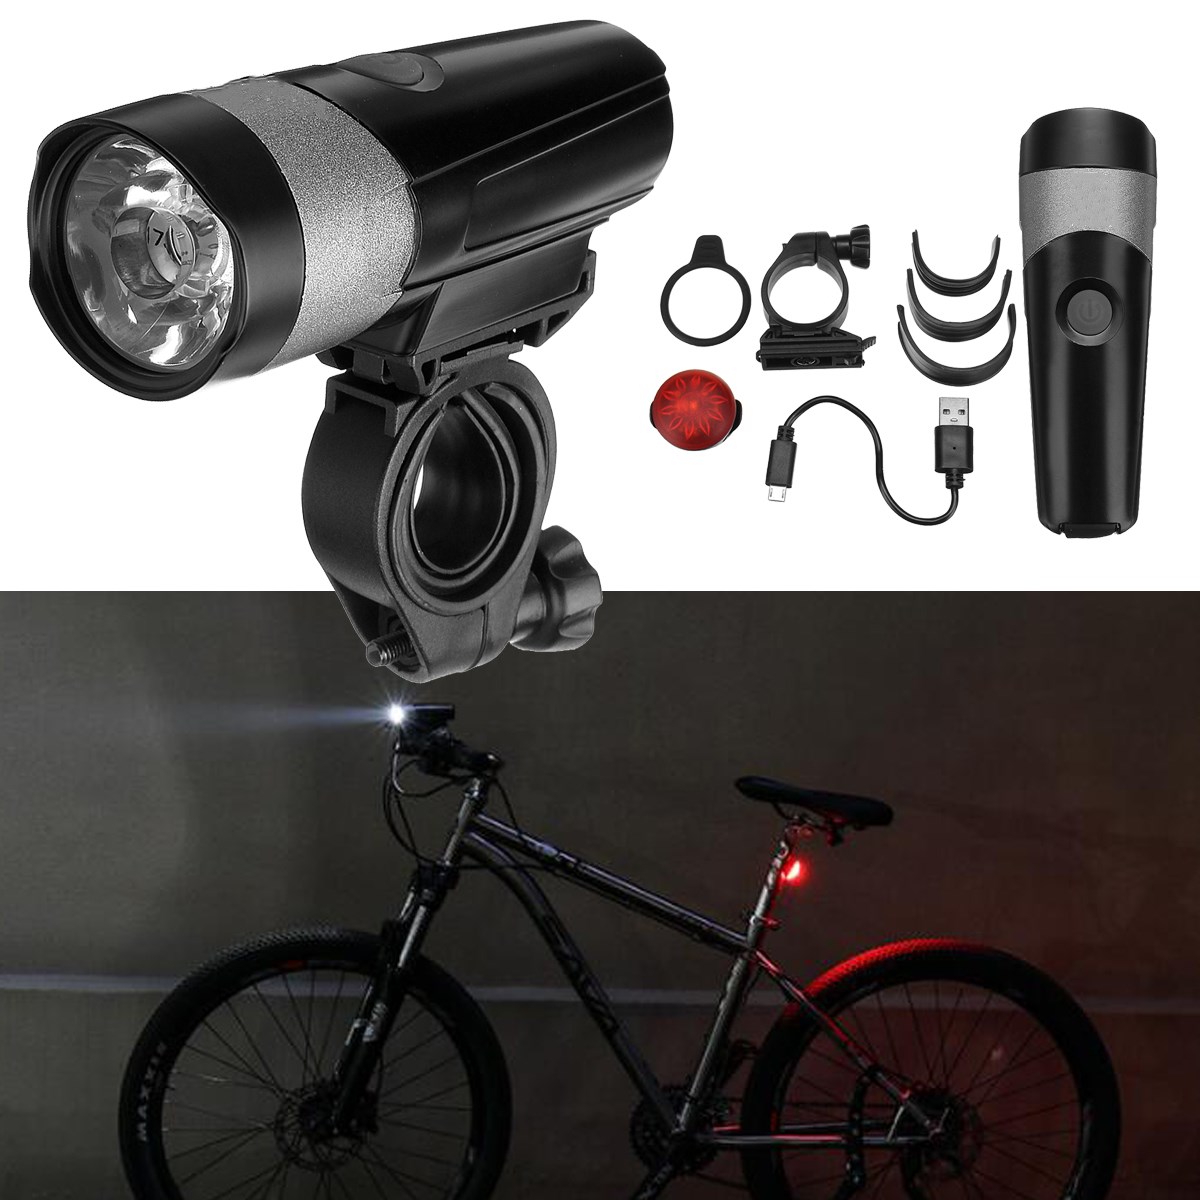 USB Rechargeable 3W CREE LED Rear Bike Light Waterproof Taillight Bicycle Lamp 